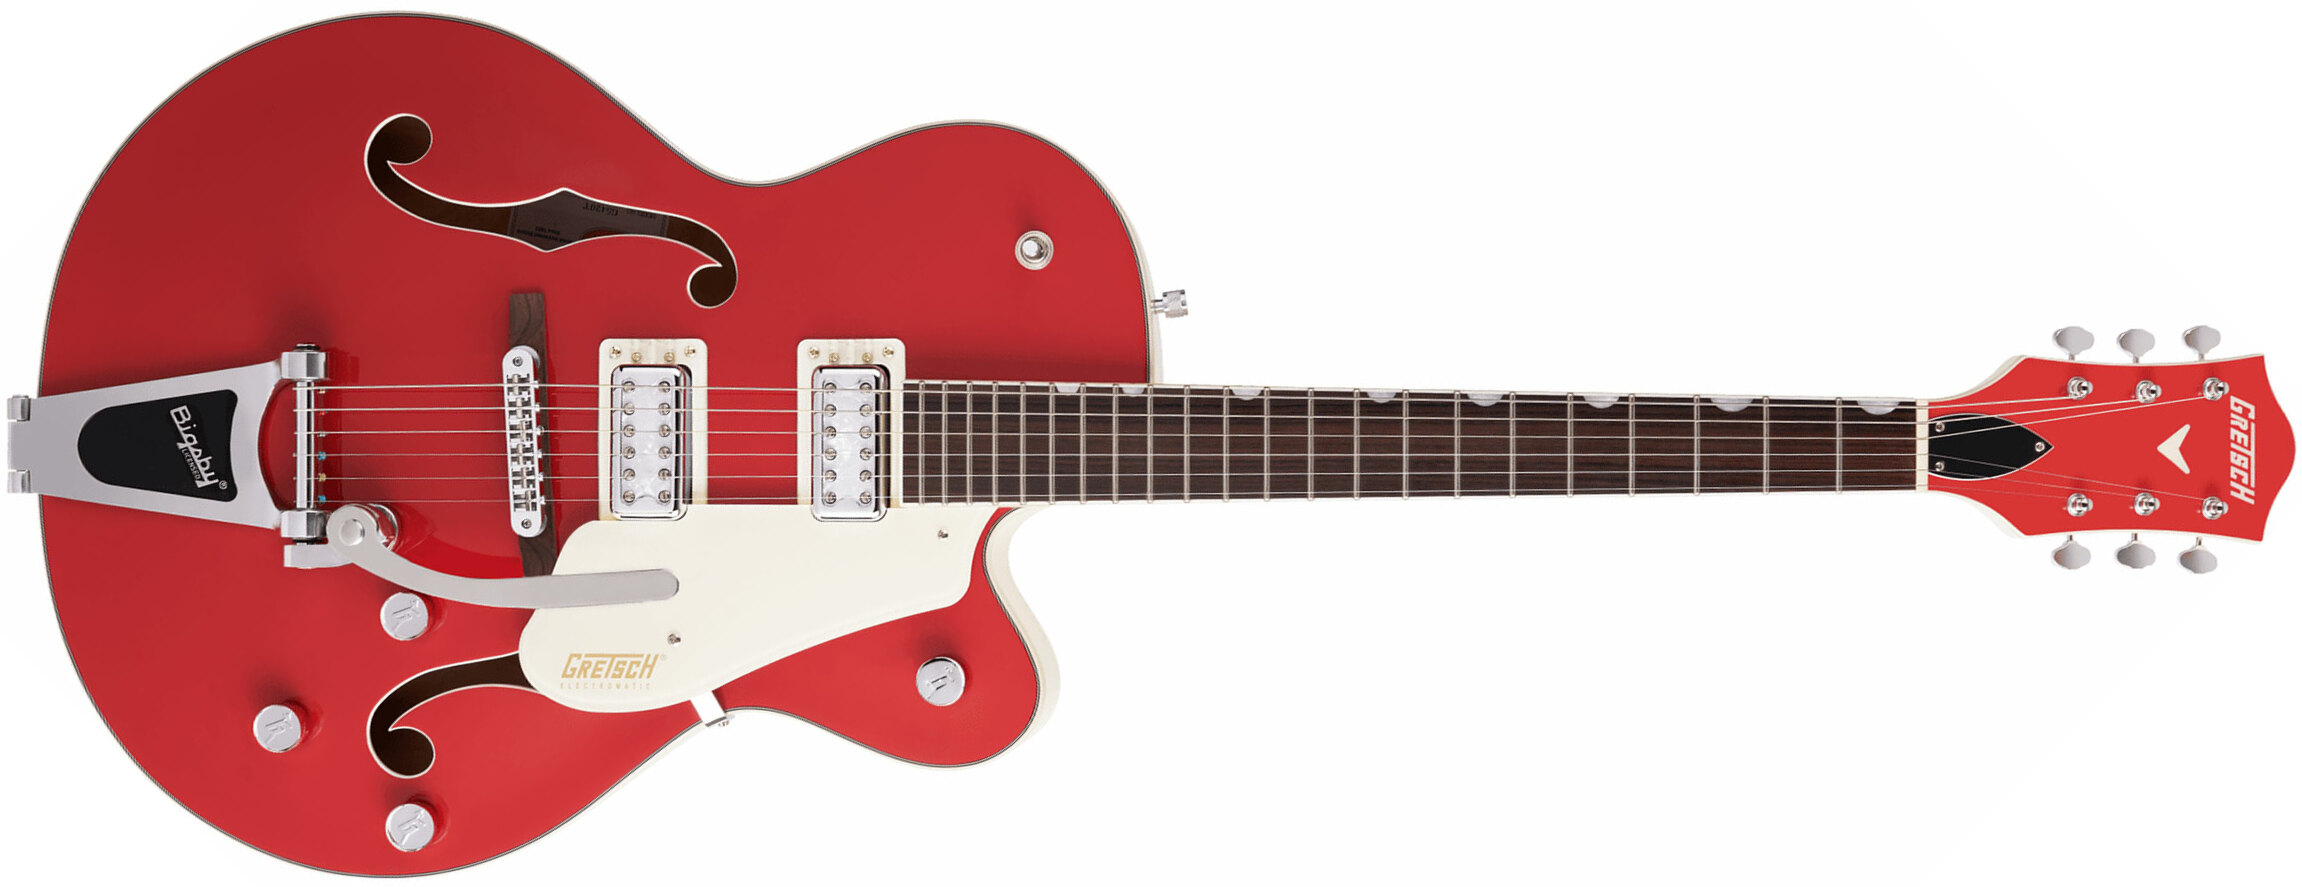 Gretsch G5410t Tri-five Electromatic Hollow Hh Bigsby Rw - 2-tone Fiesta Red On Vintage White - Semi-Hollow E-Gitarre - Main picture